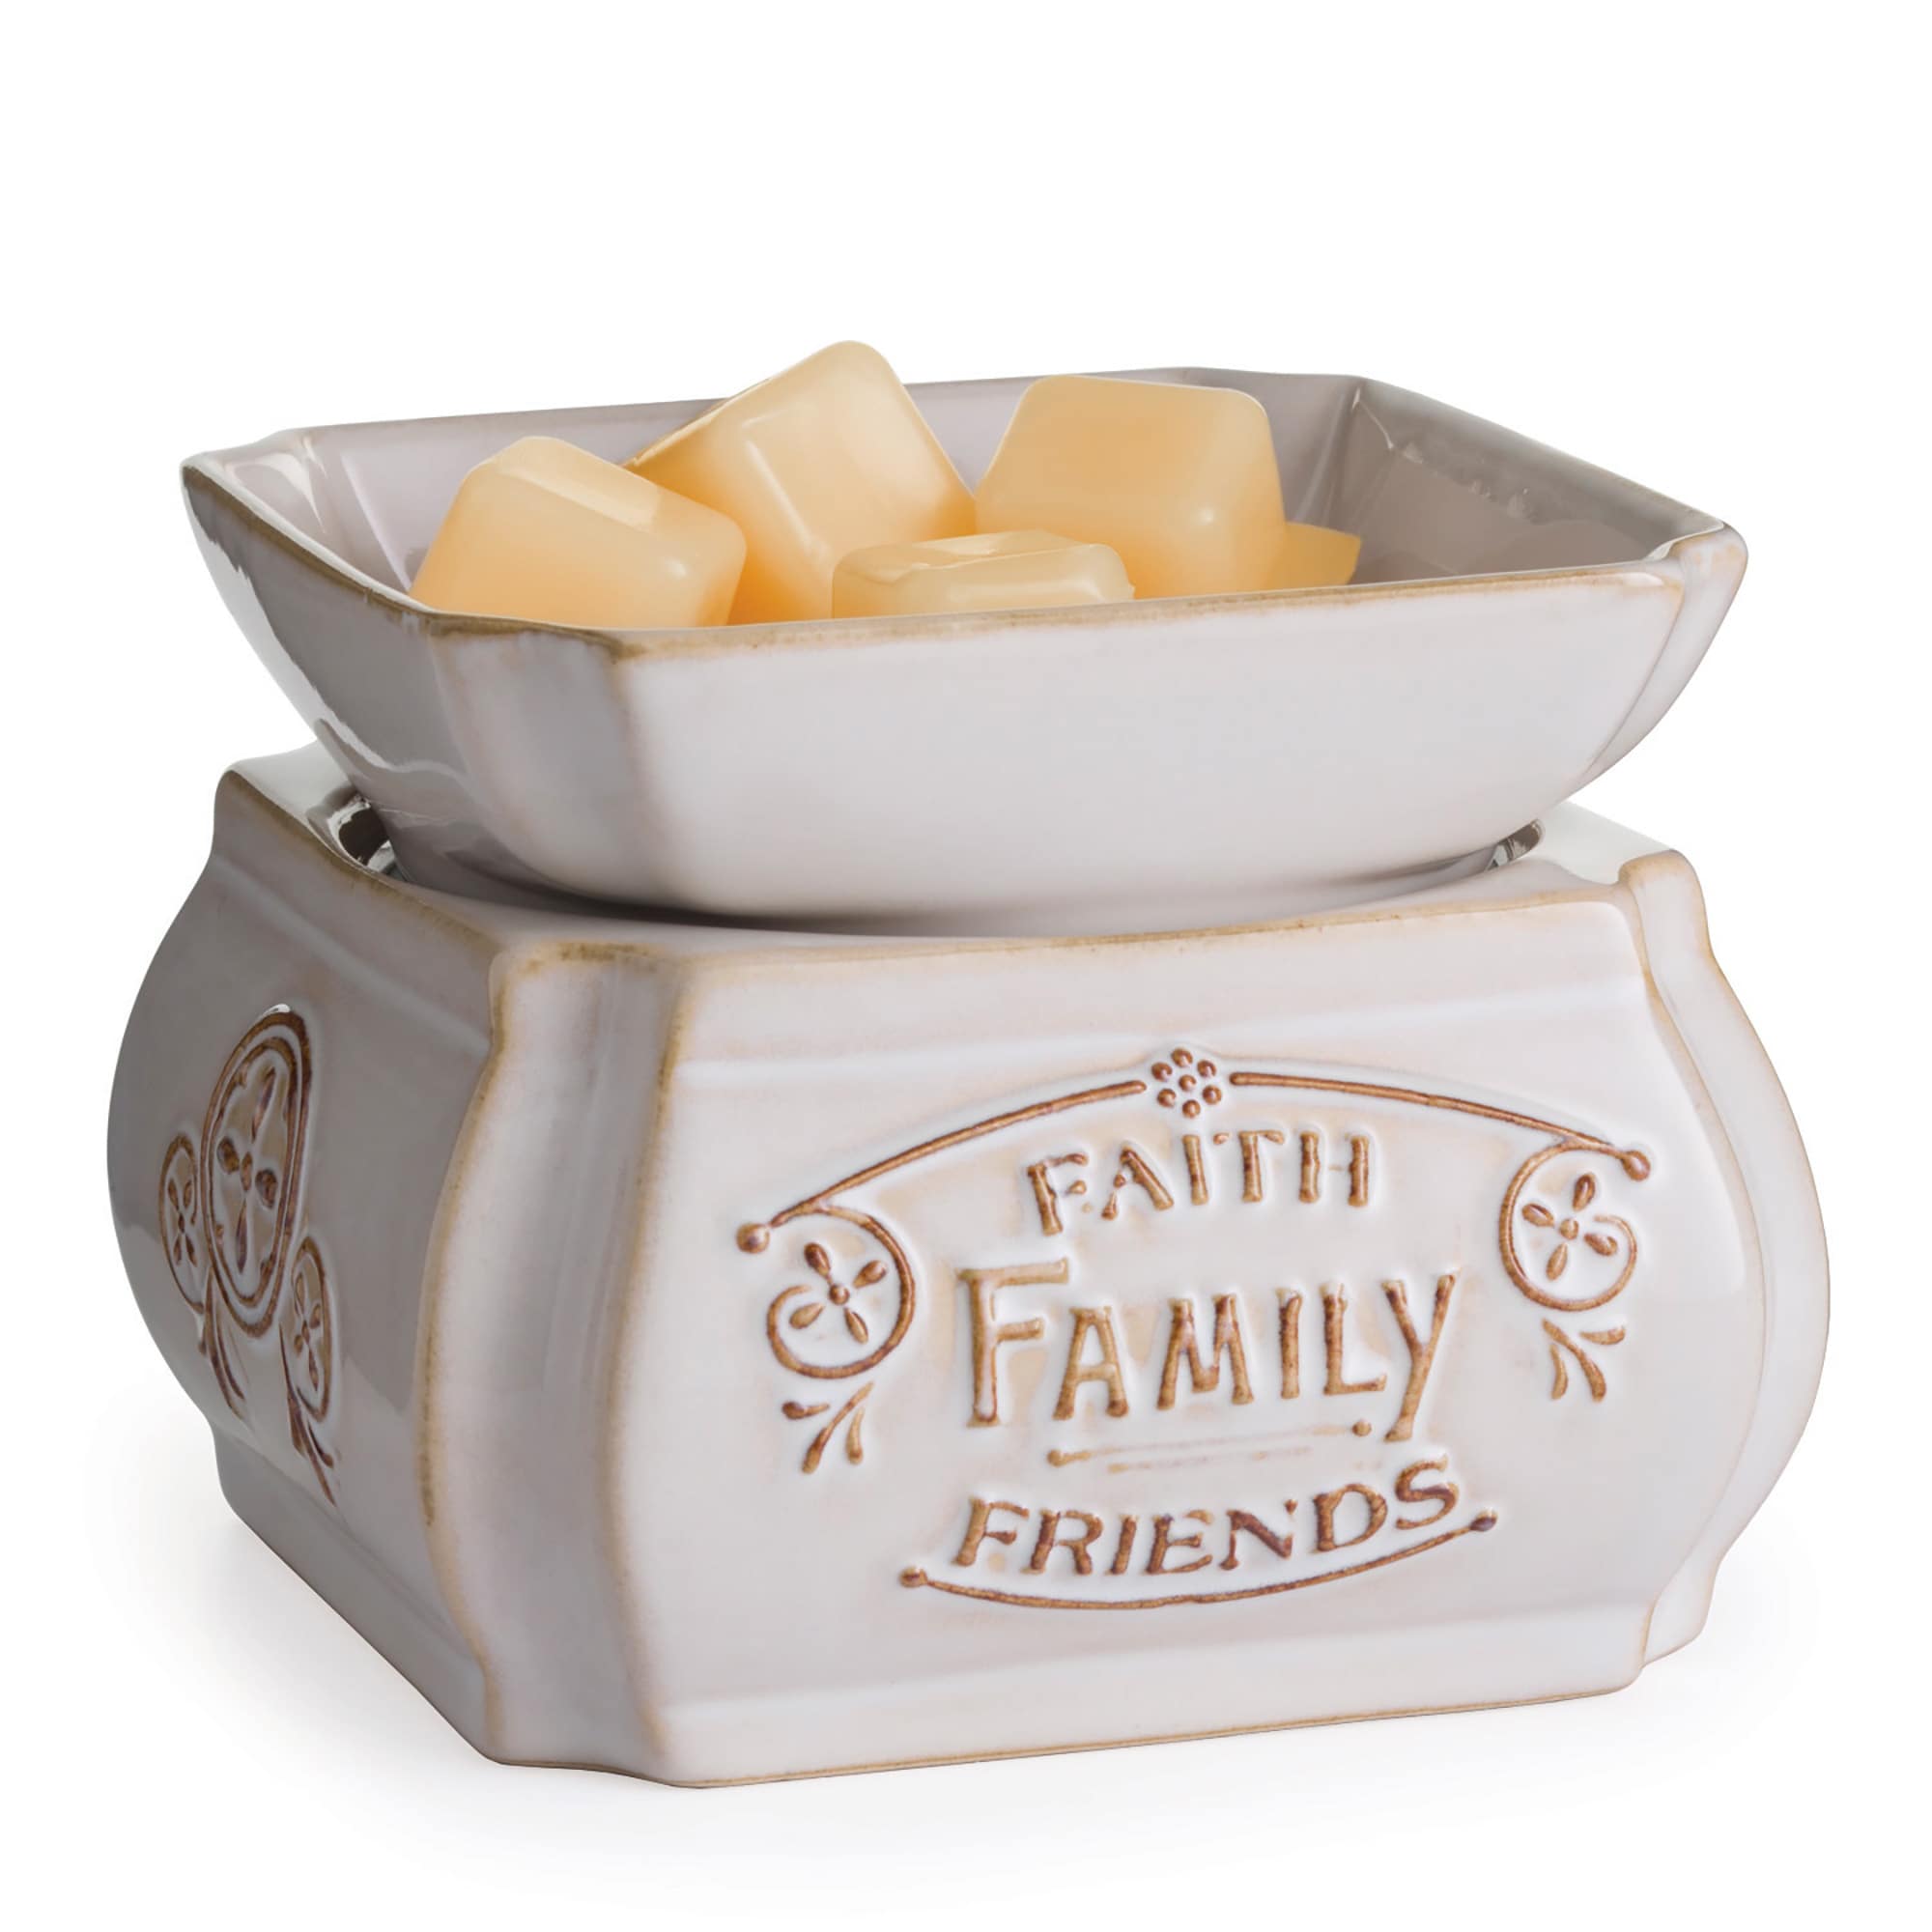 Yankee Candle Warmer Wax Melts Holder Farmhouse Country Kitchen Sink